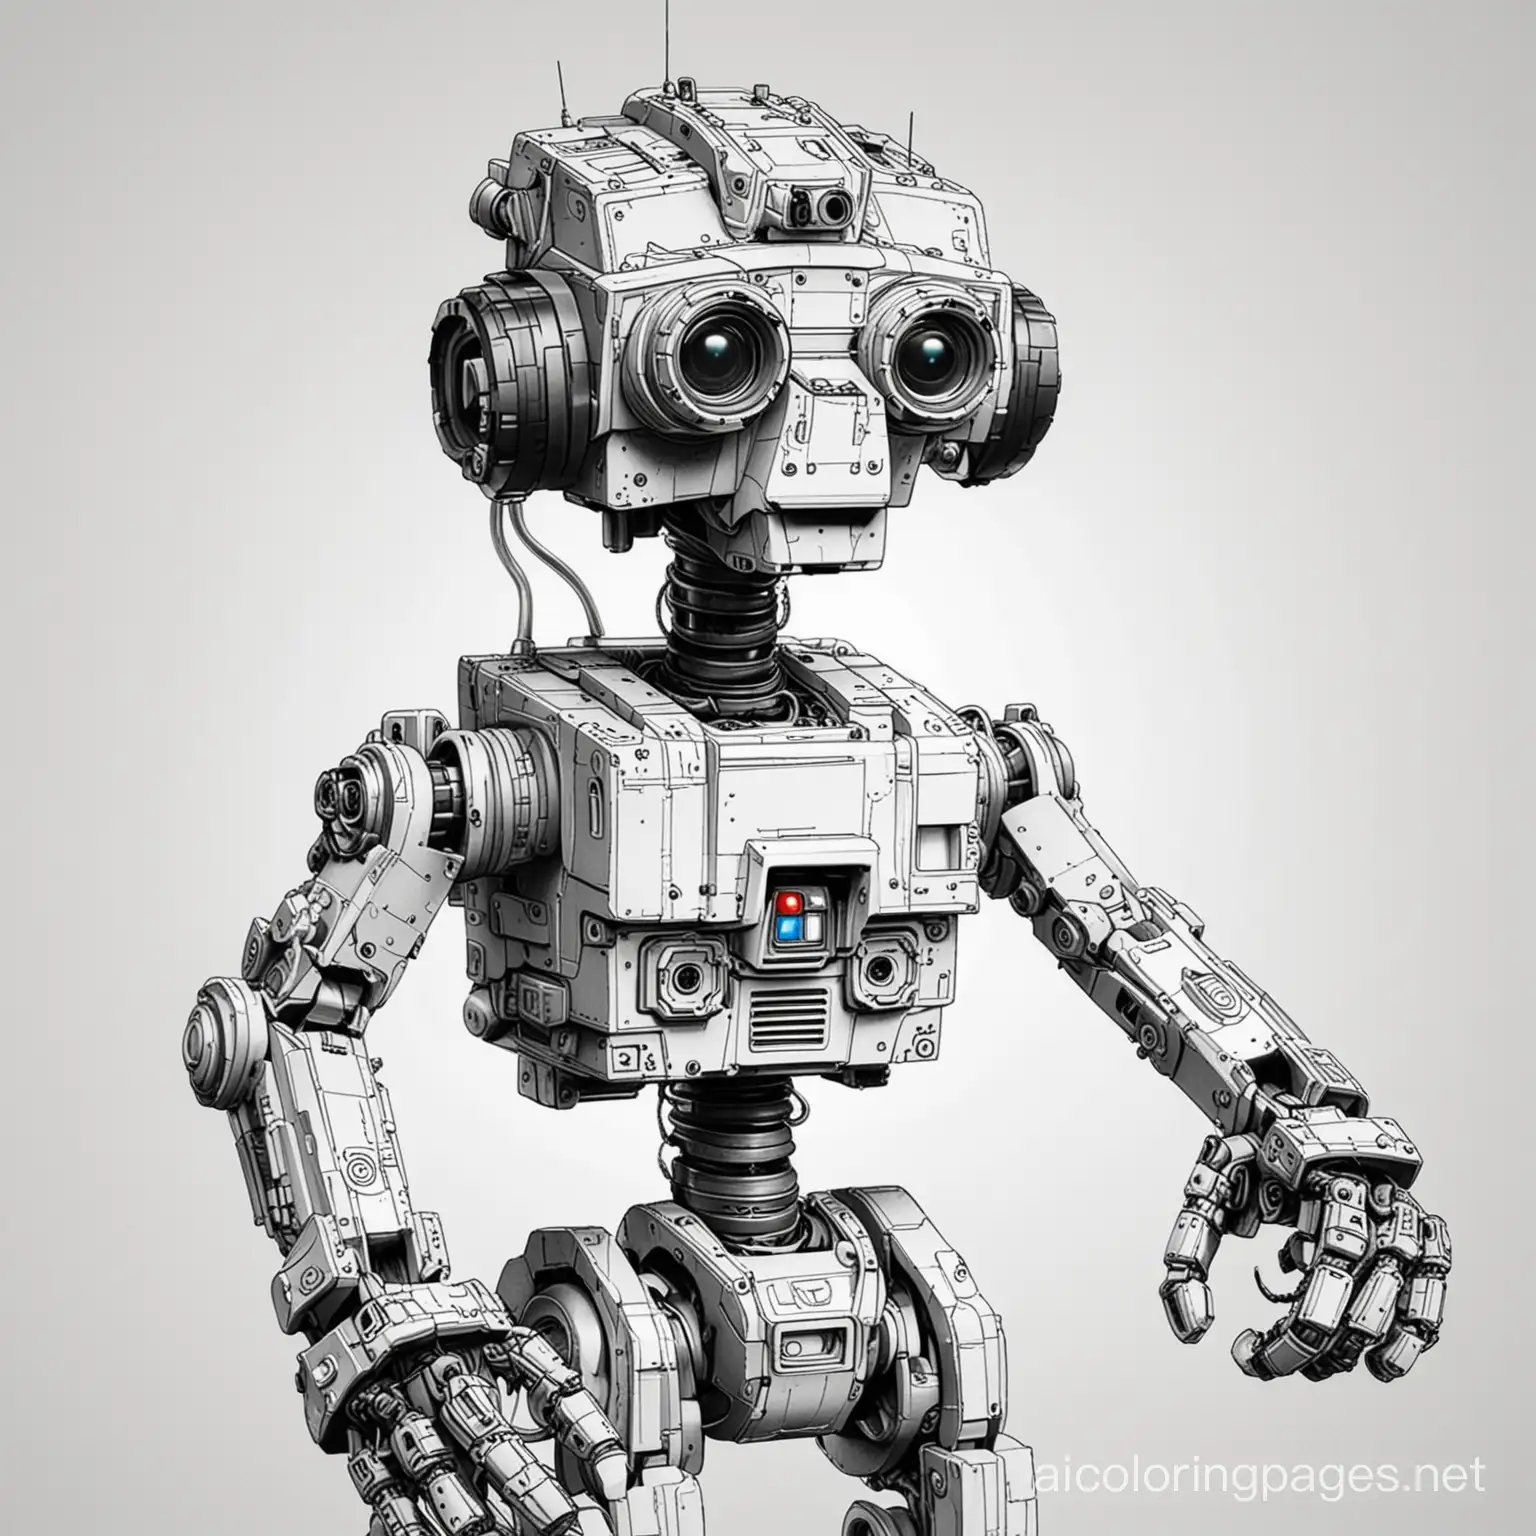 Johnny 5 from Short Circuit, Coloring Page, black and white, line art, white background, Simplicity, Ample White Space. The background of the coloring page is plain white to make it easy for young children to color within the lines. The outlines of all the subjects are easy to distinguish, making it simple for kids to color without too much difficulty